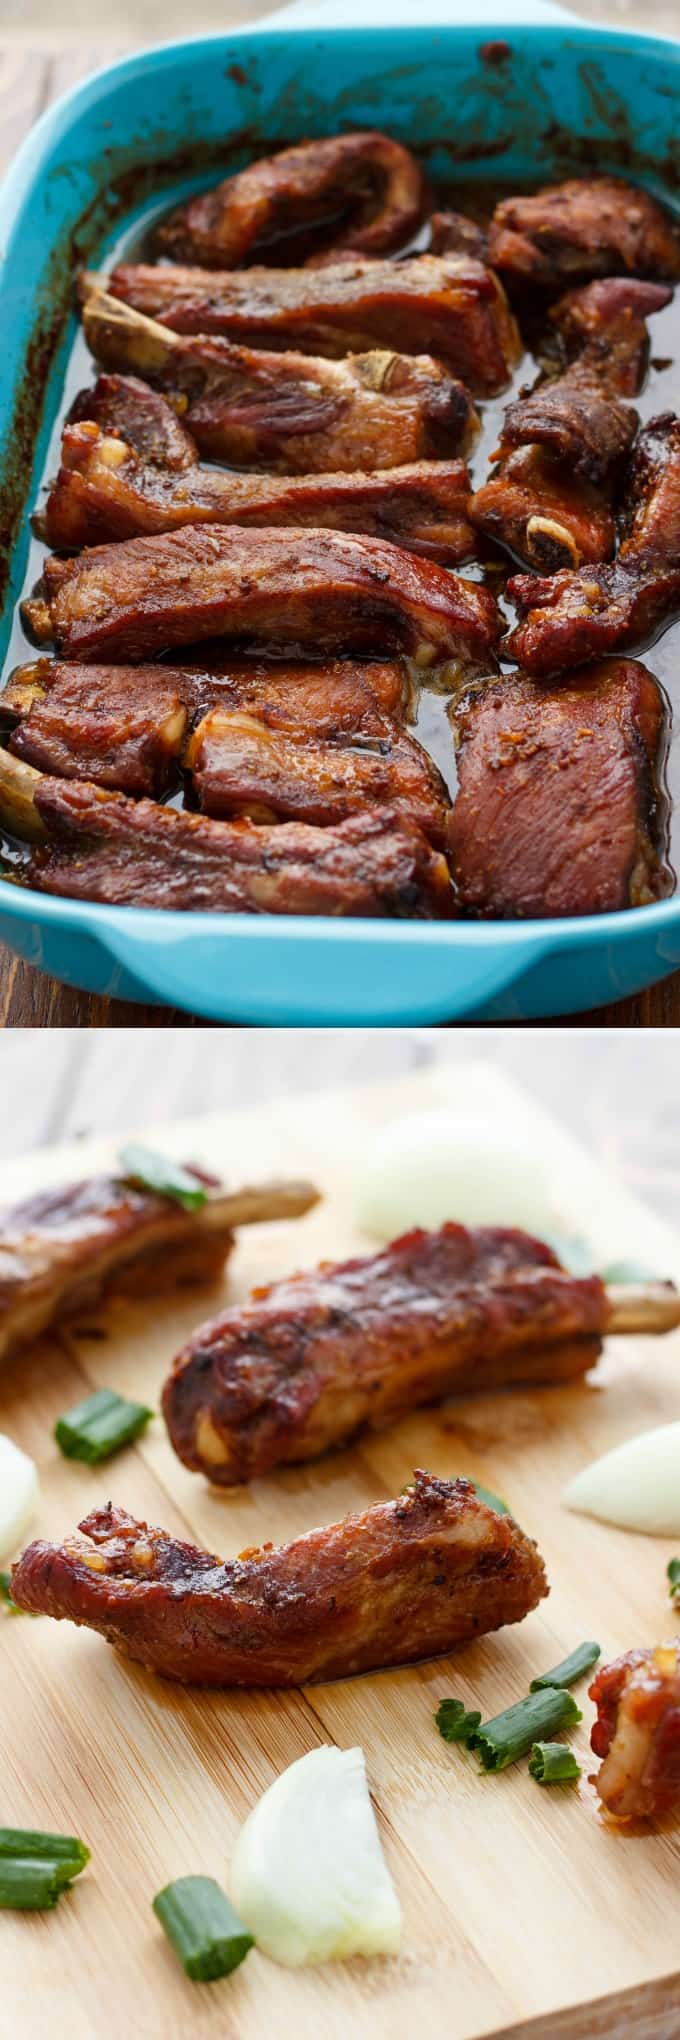 Dry Garlic Ribs Canadian Chinese Style in blue pot and on wooden pad#ribs